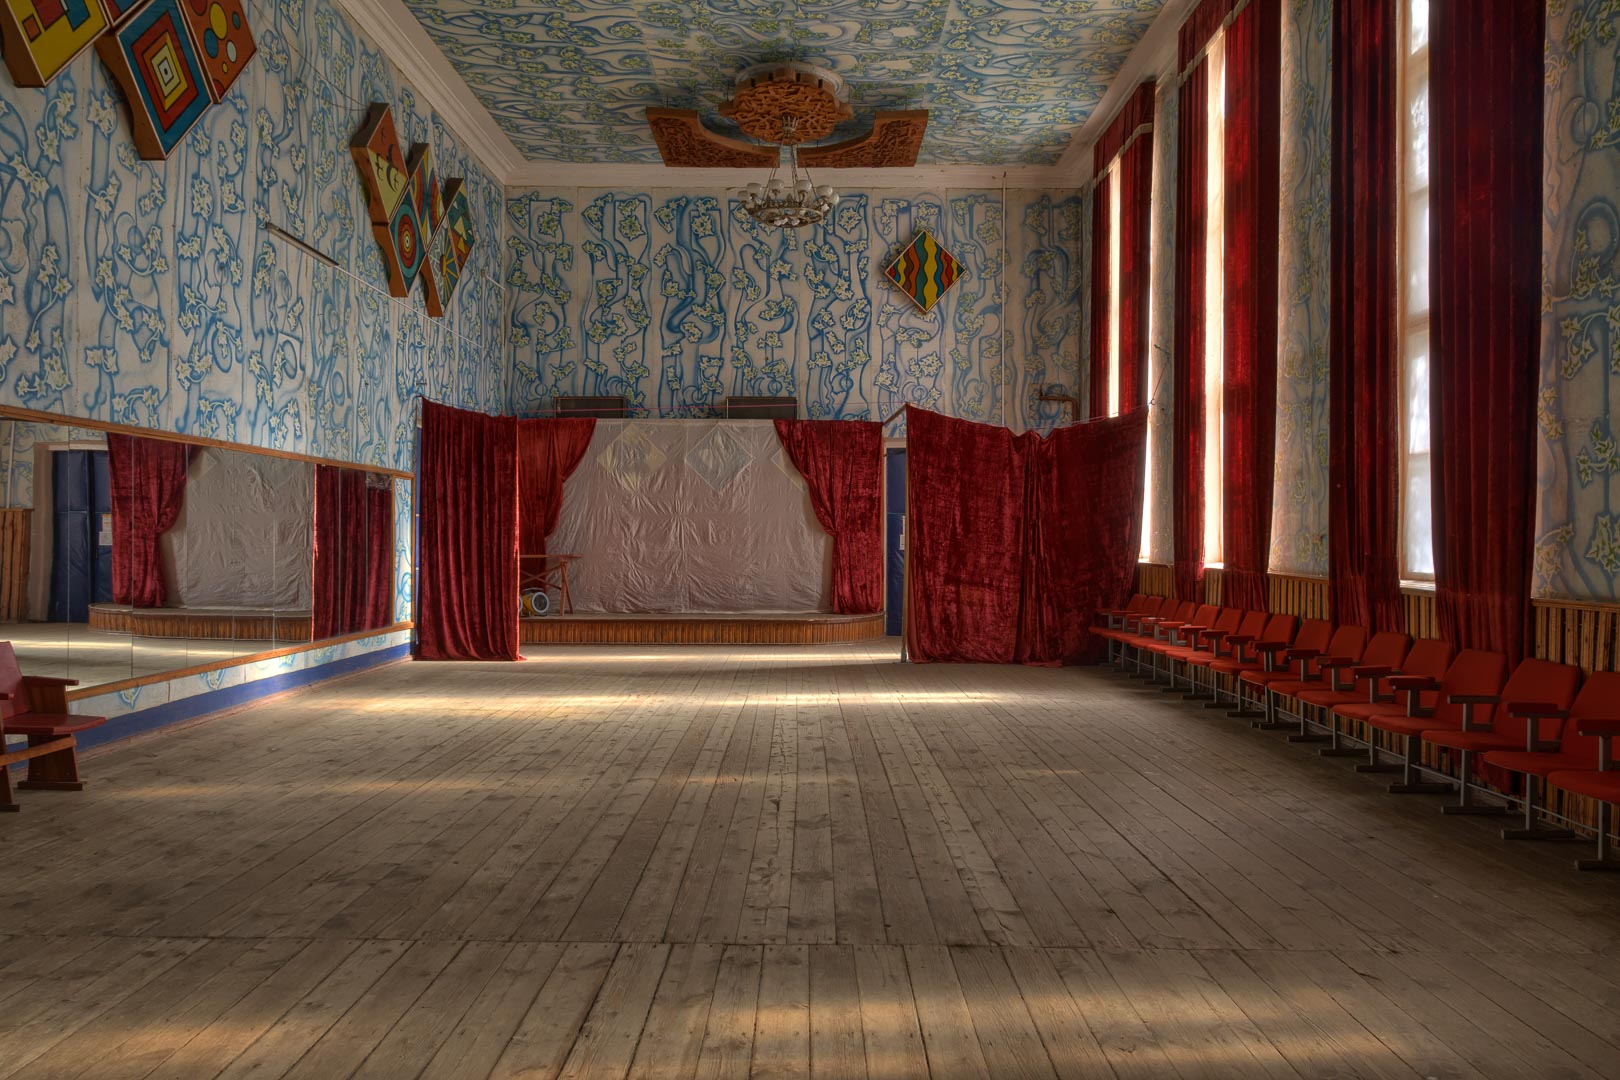 Backplate • ID: 12359 • HDRI Haven - Room Decorated With Garlands